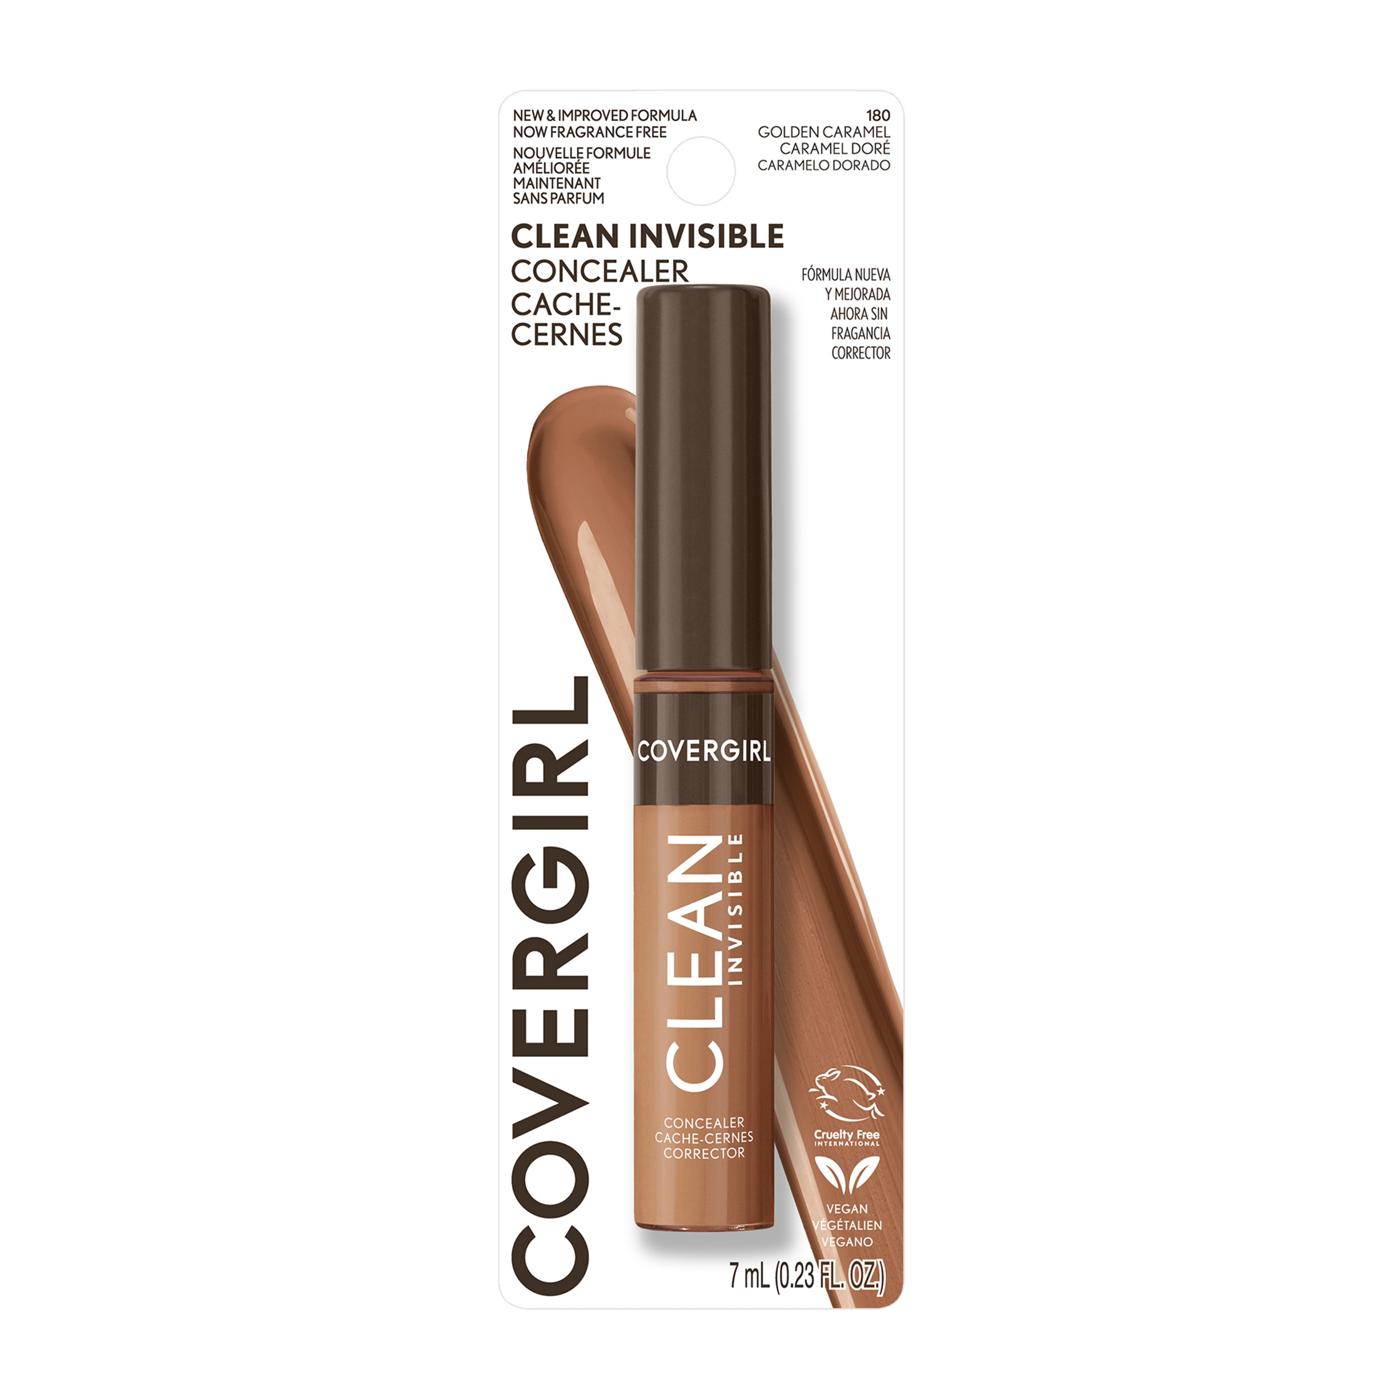 Covergirl Clean Invisible Concealer - Golden Caramel; image 1 of 15